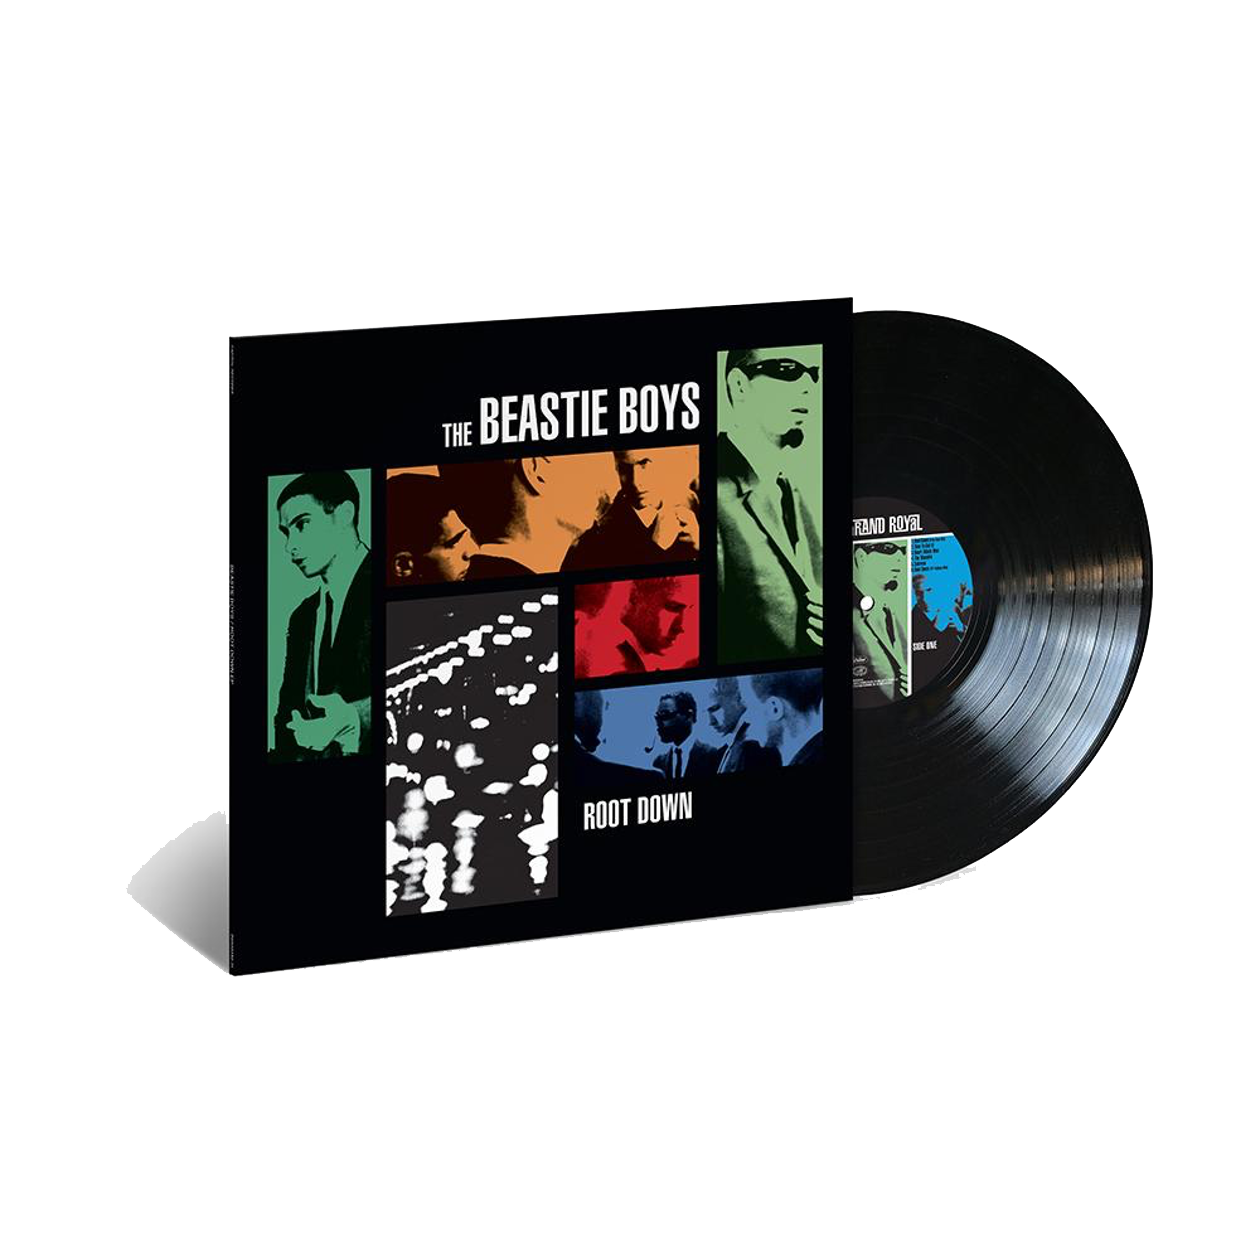 MUSIC - Beastie Boys Official Store